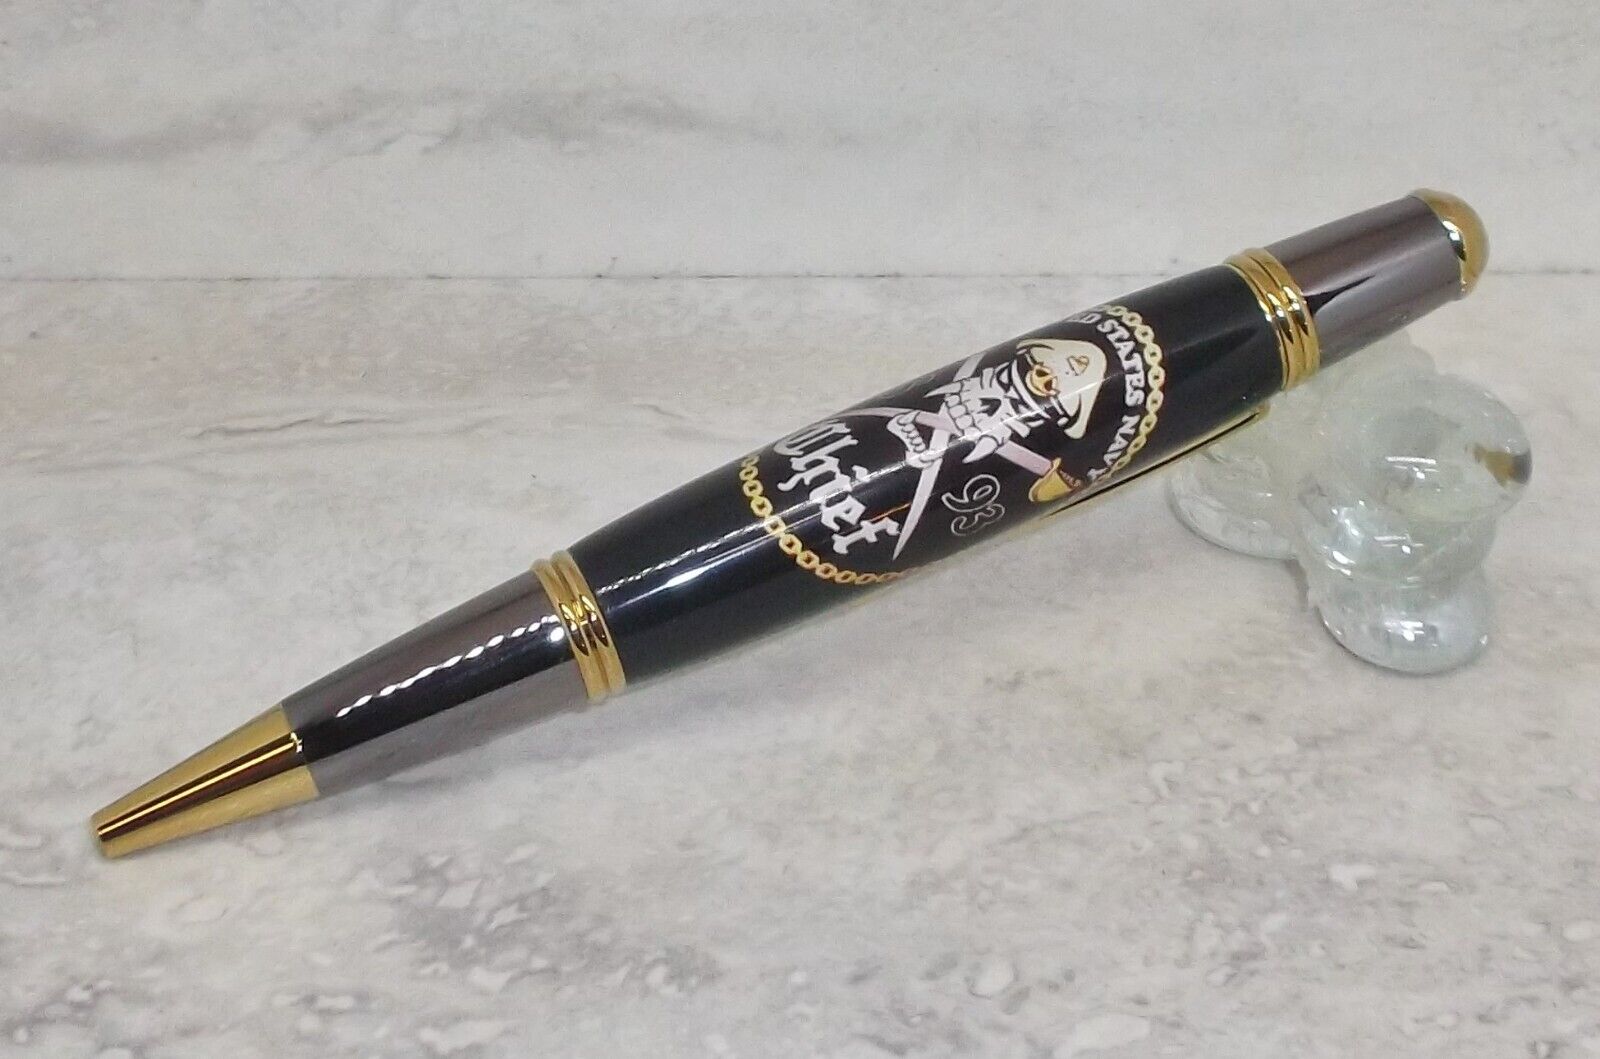 Handcrafted Sierra Pen in US Navy Chief Acrylic, Gold & Gun Metal Finish